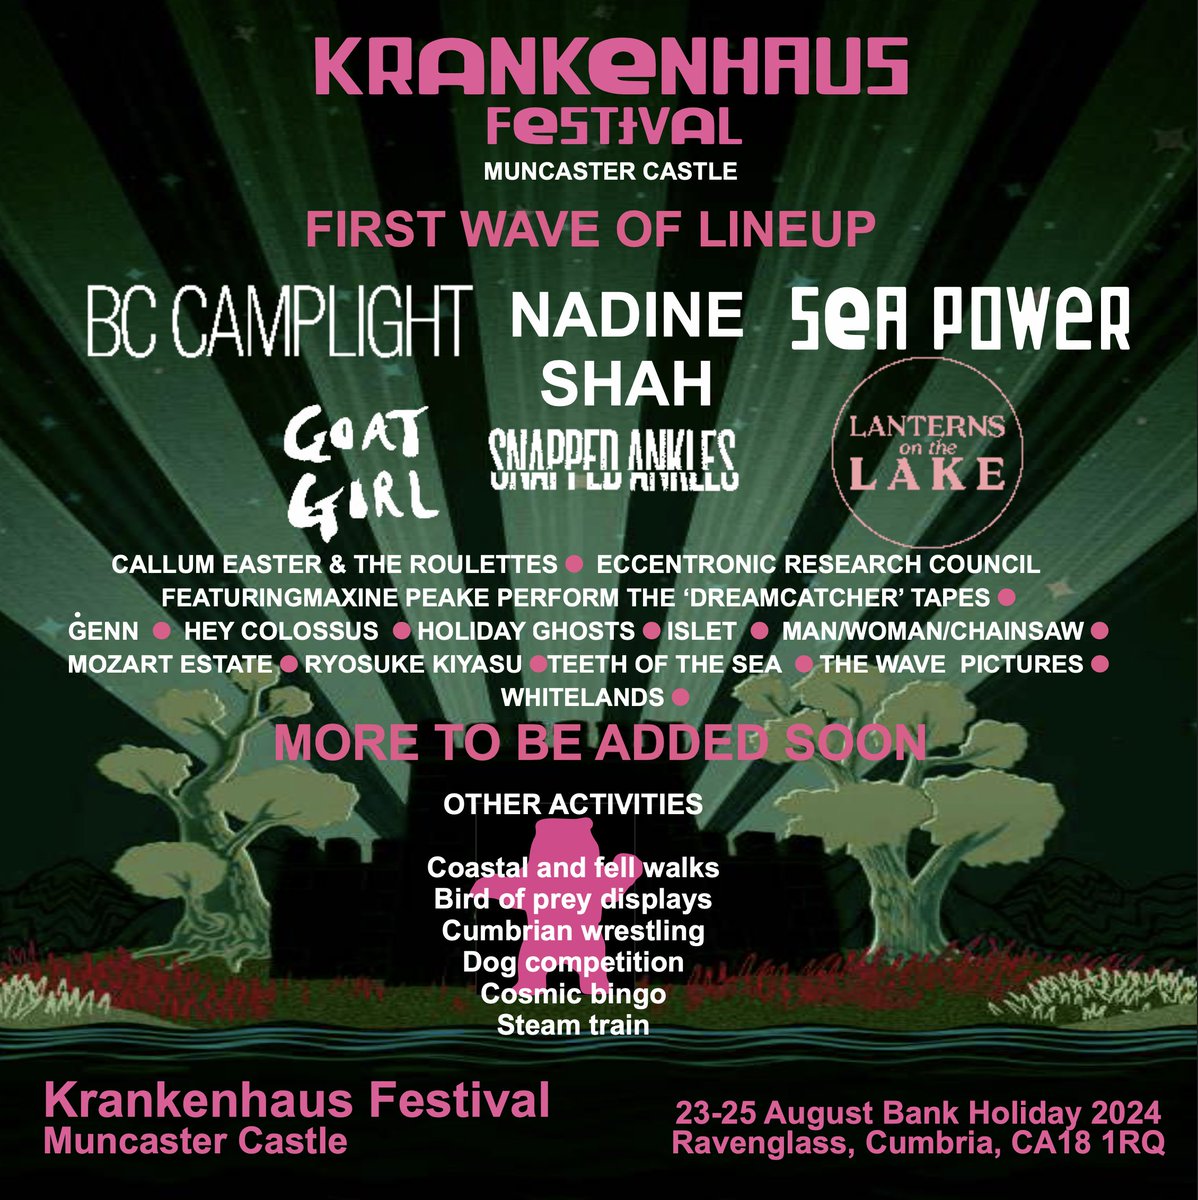 Mozart Estate are playing the Krankenhaus Festival in August! Get your tickets here: krankenhausfestival.com